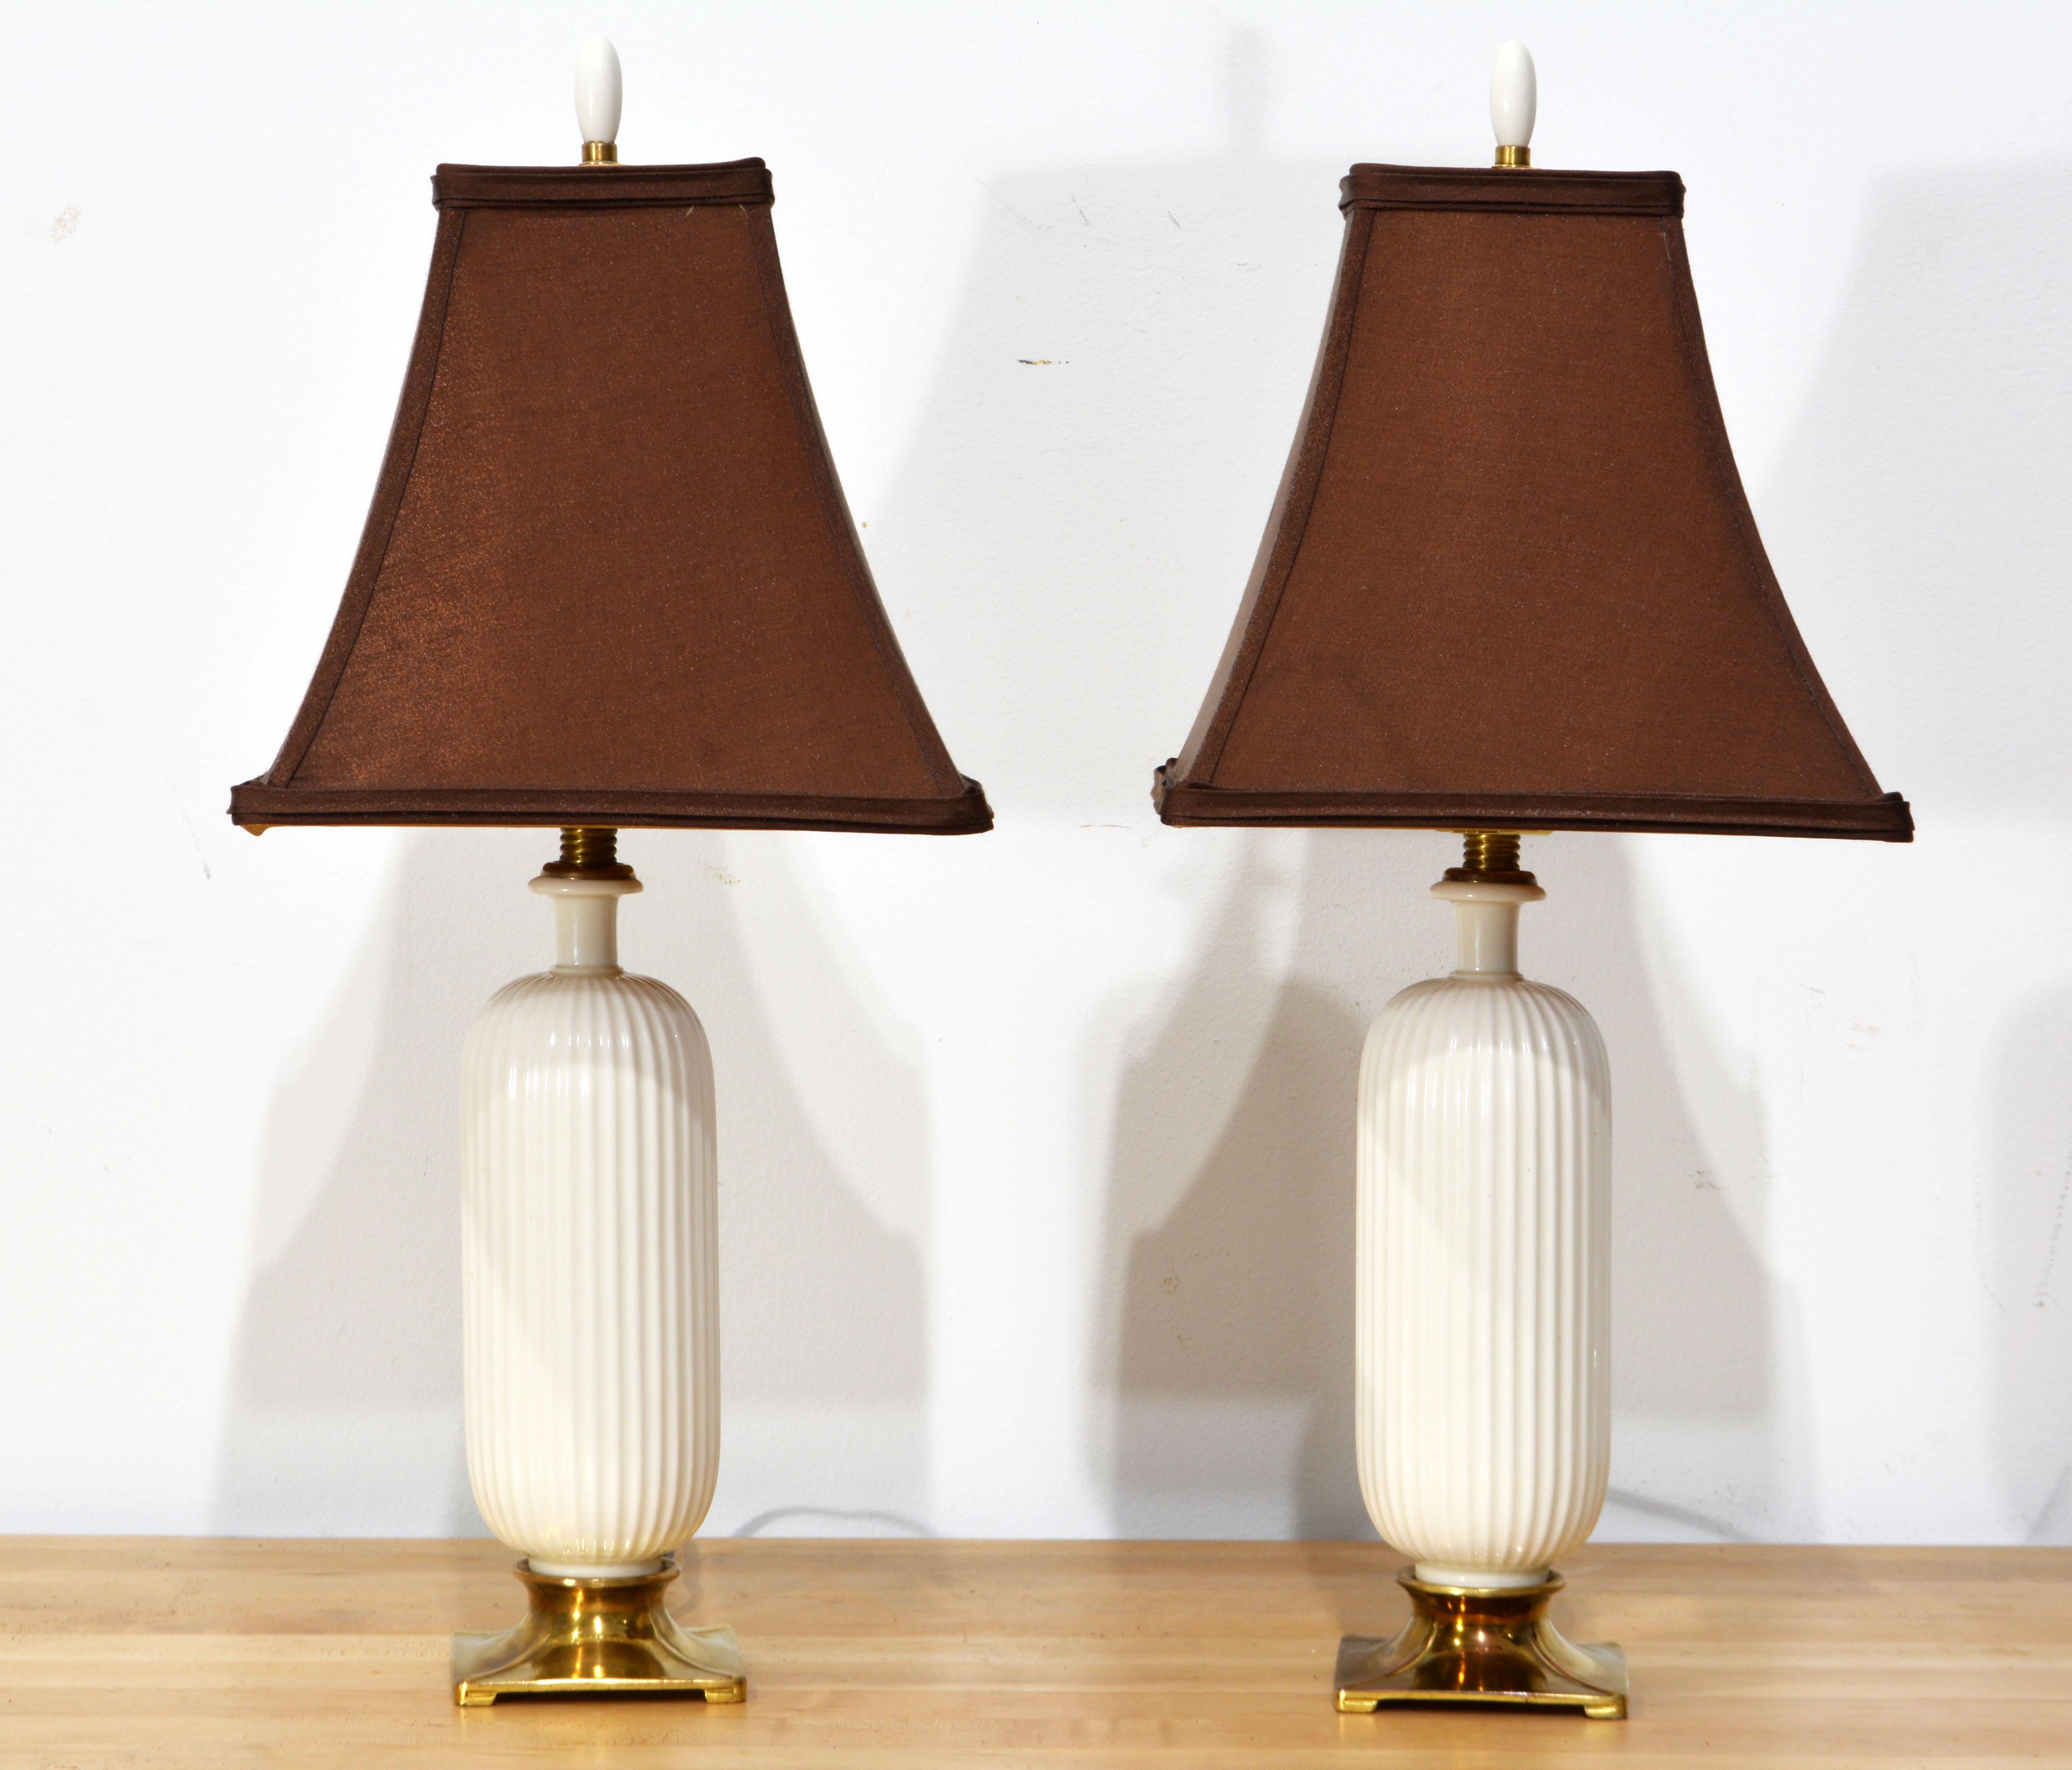 This pair of white glazed (Blanc de Chine) fluted porcelain lamps mounted on square bronze bases and topped by bronze mounts represent timeless elegance. The style is bordering art deco and they likely date to the 1940's-50's. The maker is the New